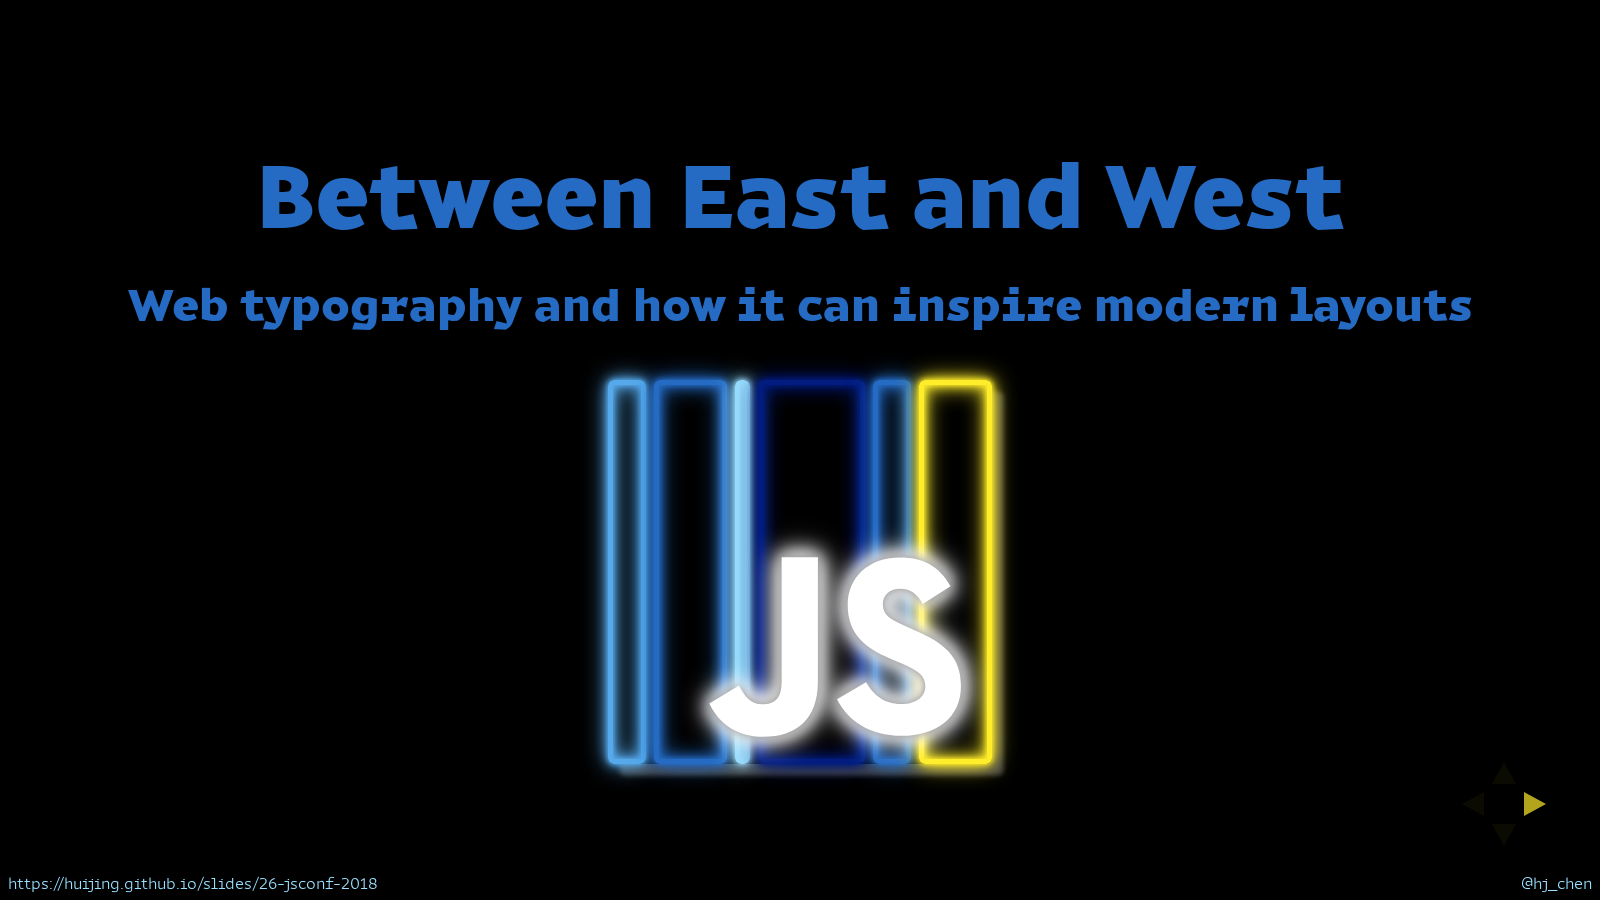 Between East and West: web typography and how it can inspire modern layouts